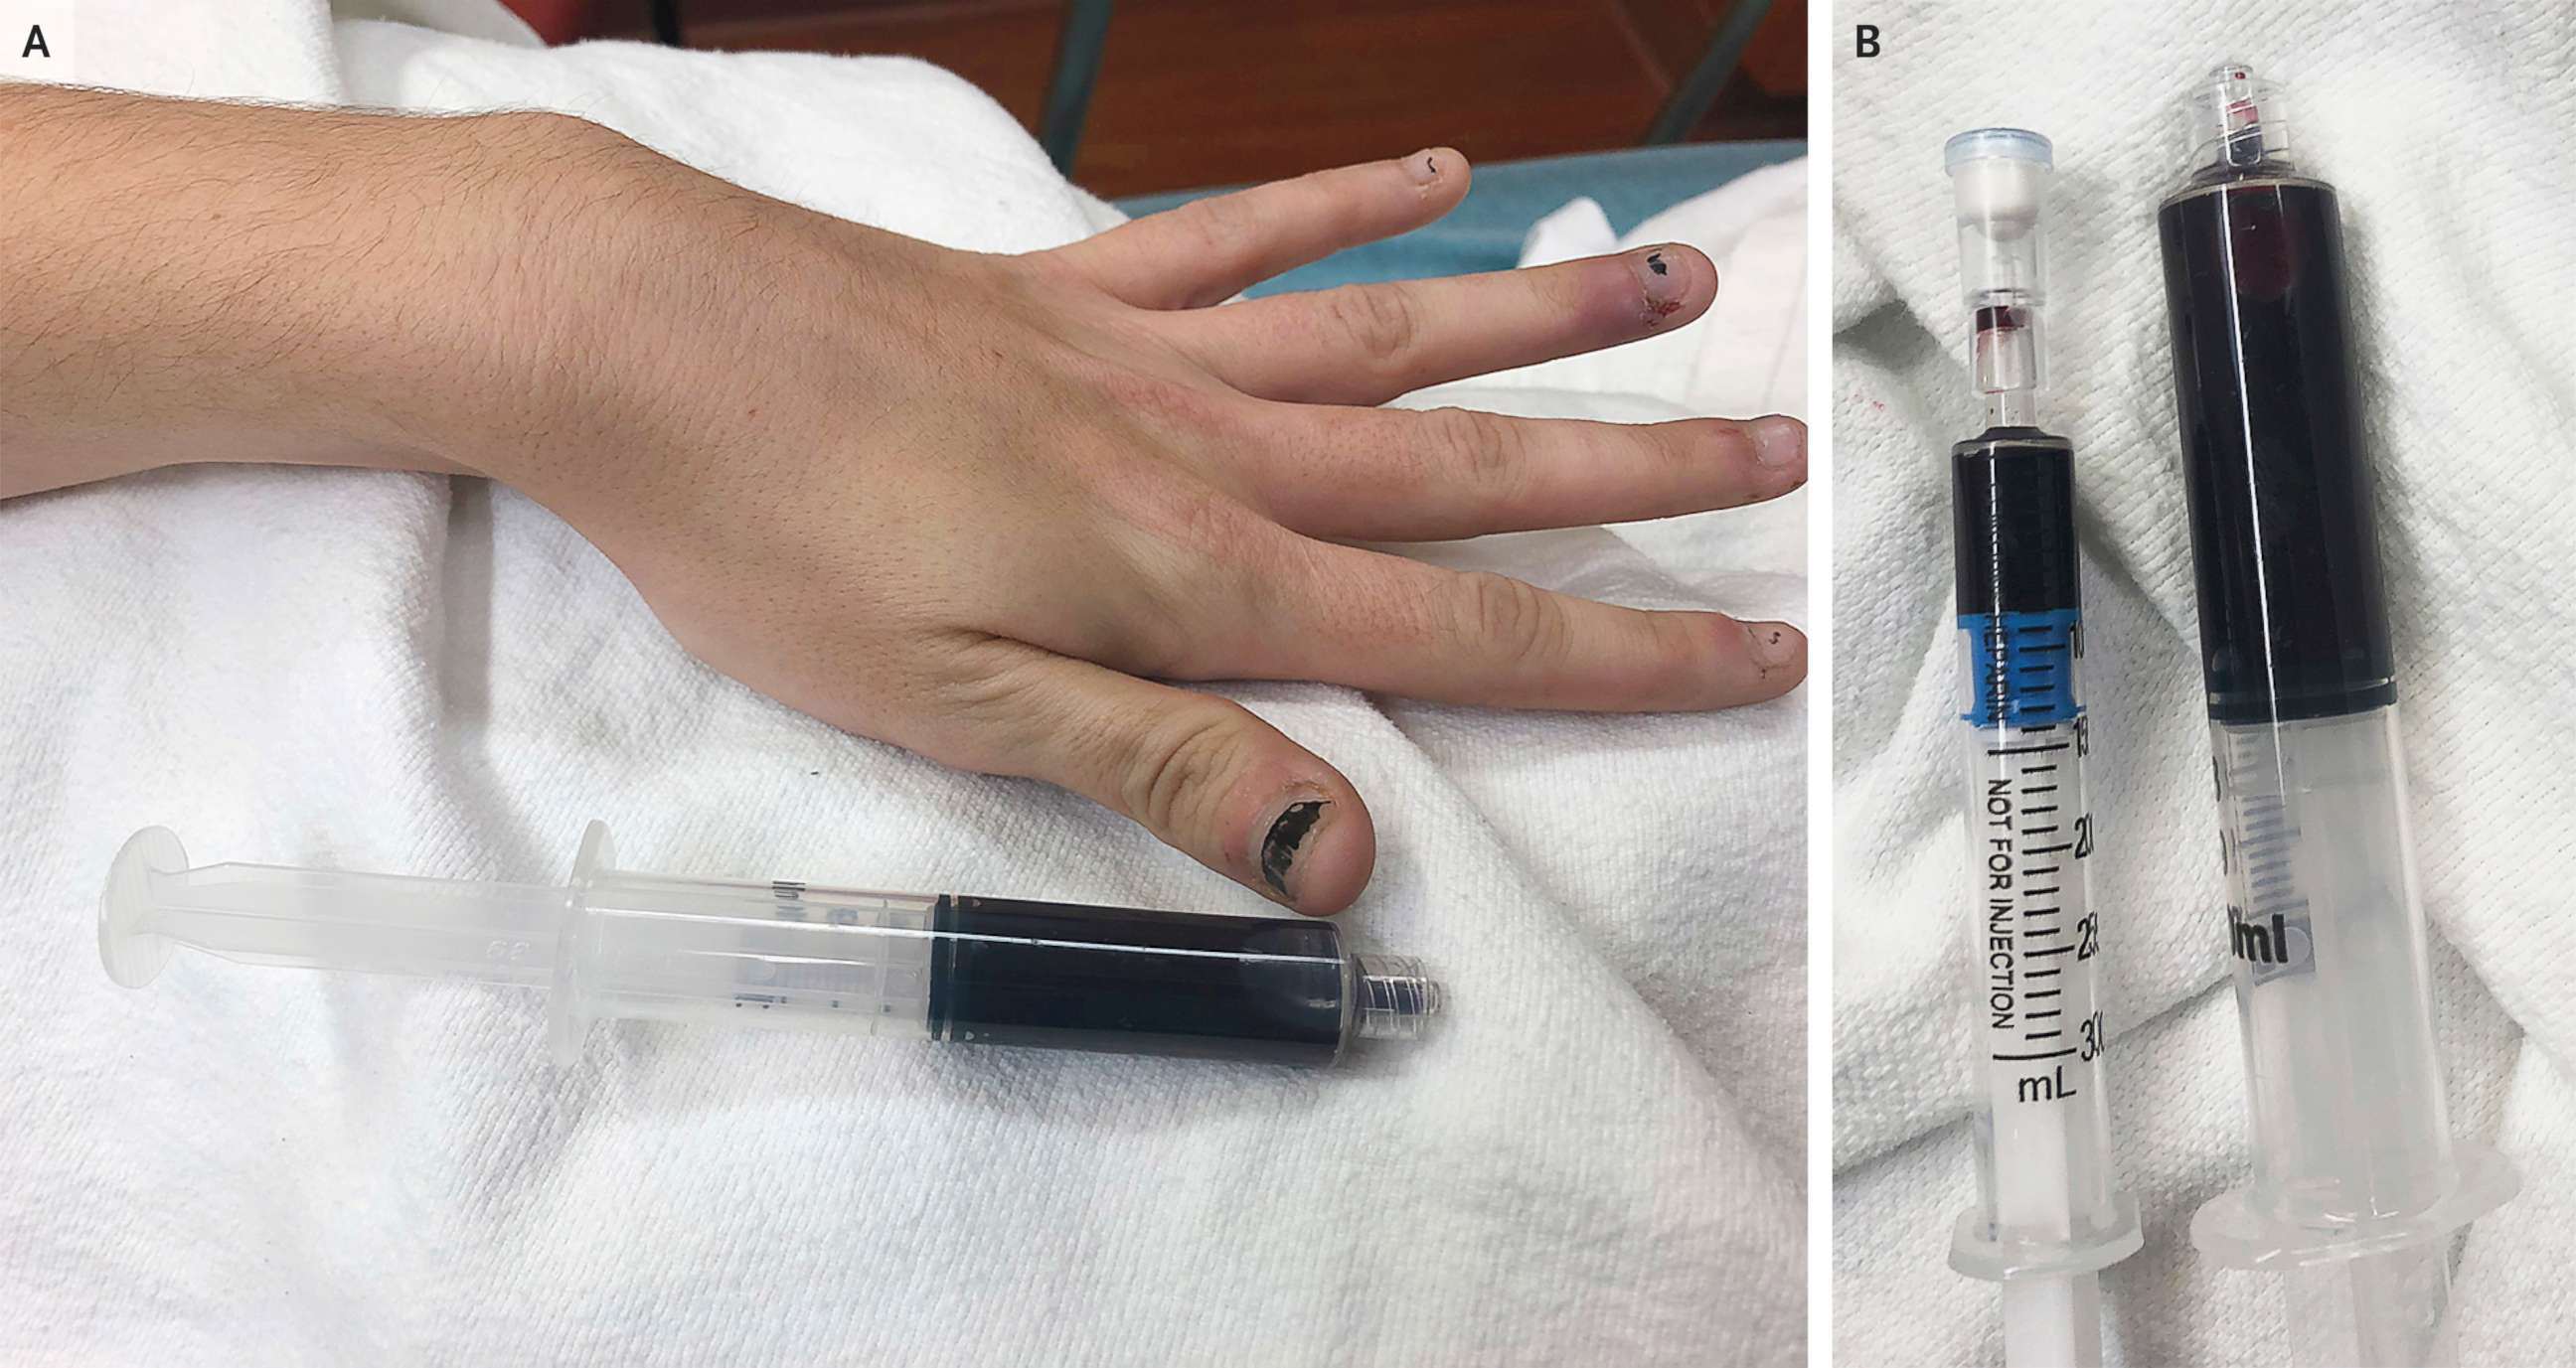 PHOTO: A 25-year-old Rhode Island woman's blood turned navy blue after taking large amounts of an over-the-counter medication containing benzocaine.